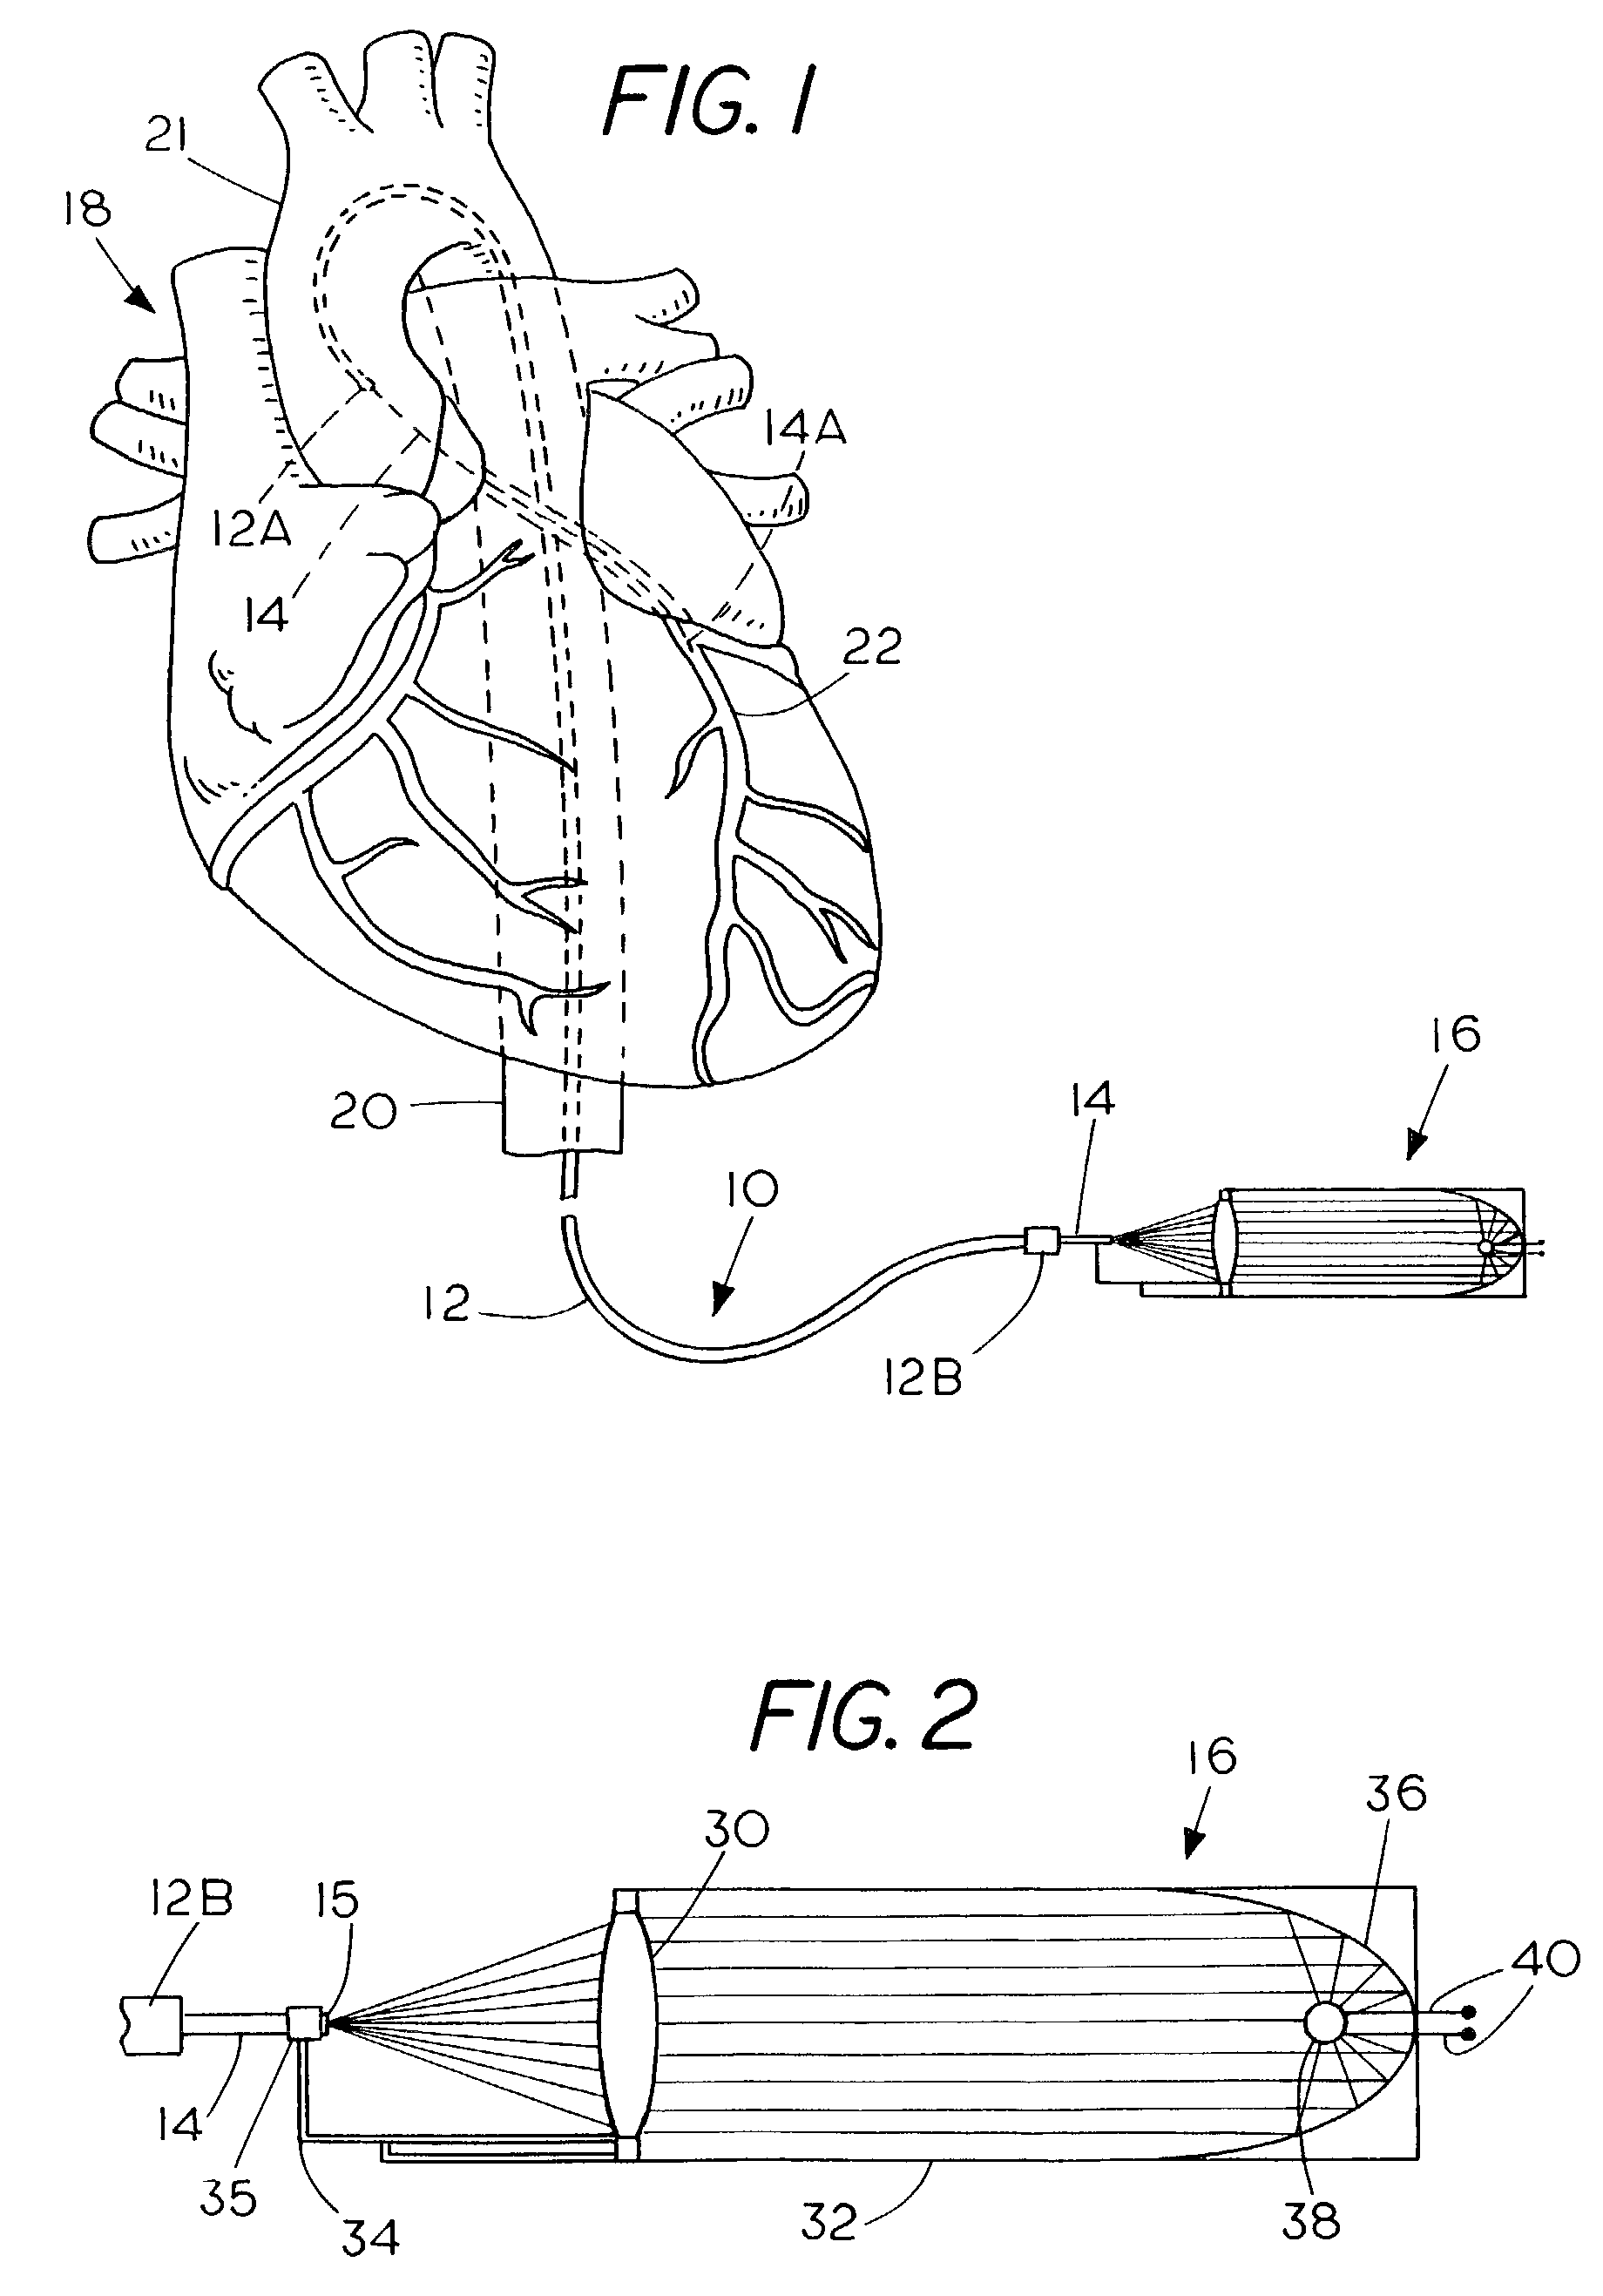 Apparatus and method for treating atherosclerotic vascular disease through light sterilization